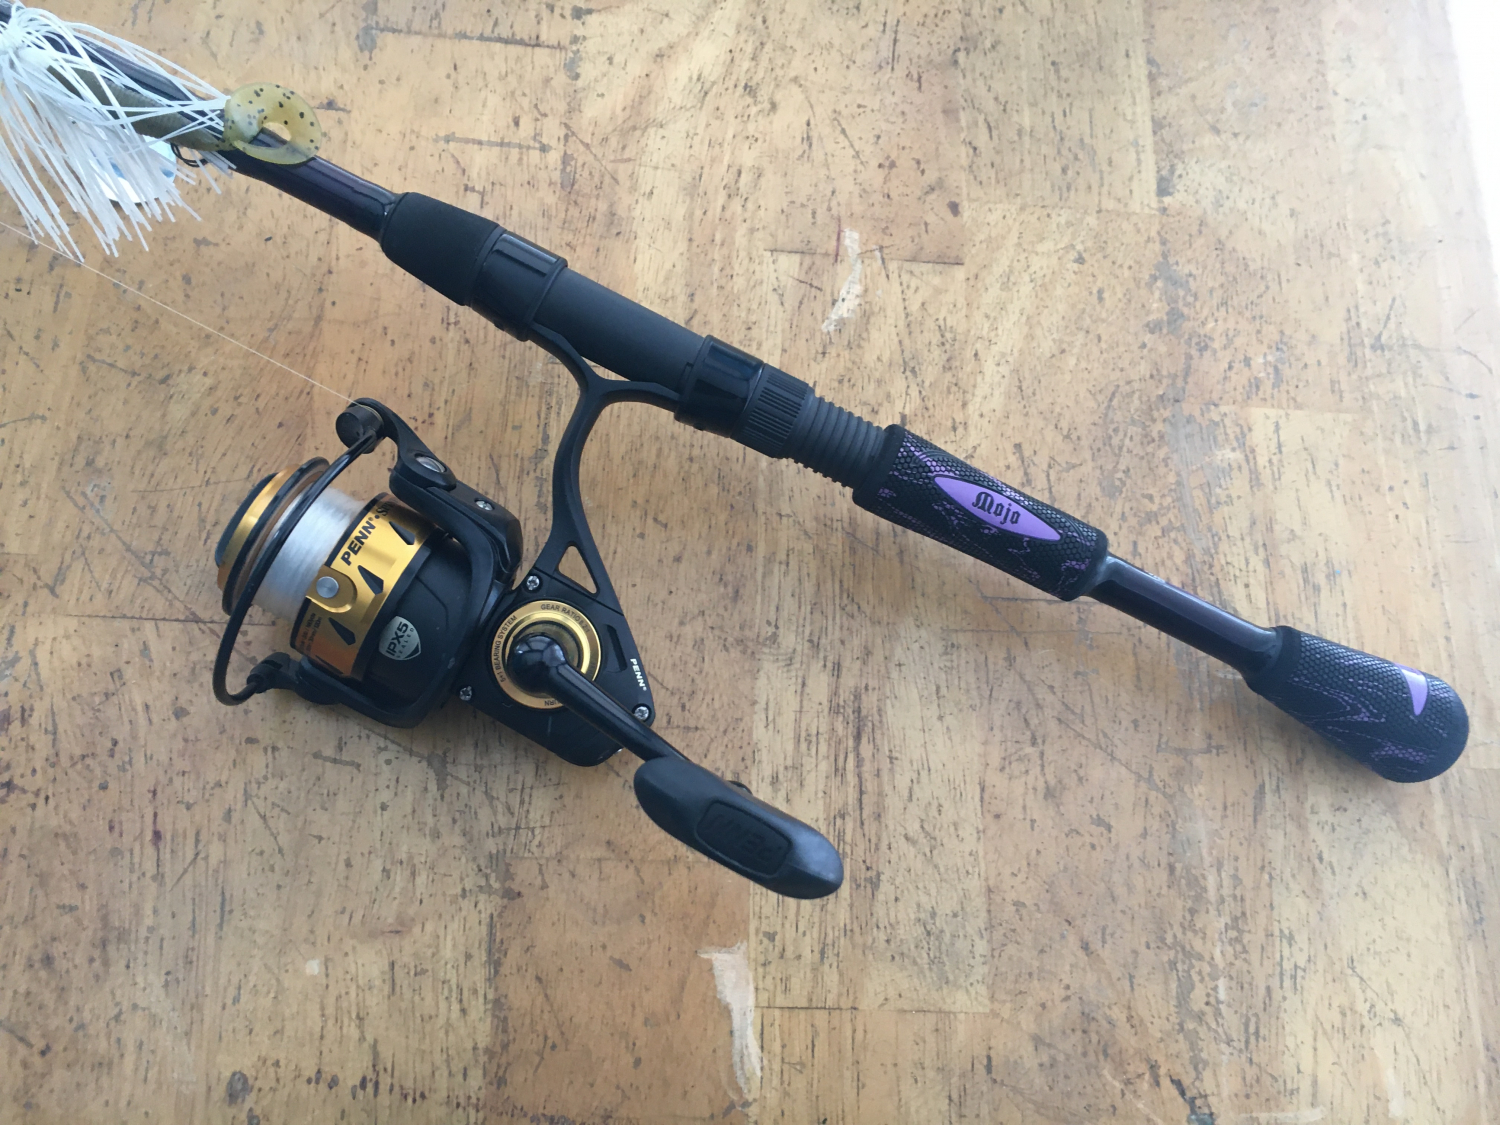 Tsunami Spinning Fishing Reel for Sale in Fort Lauderdale, FL